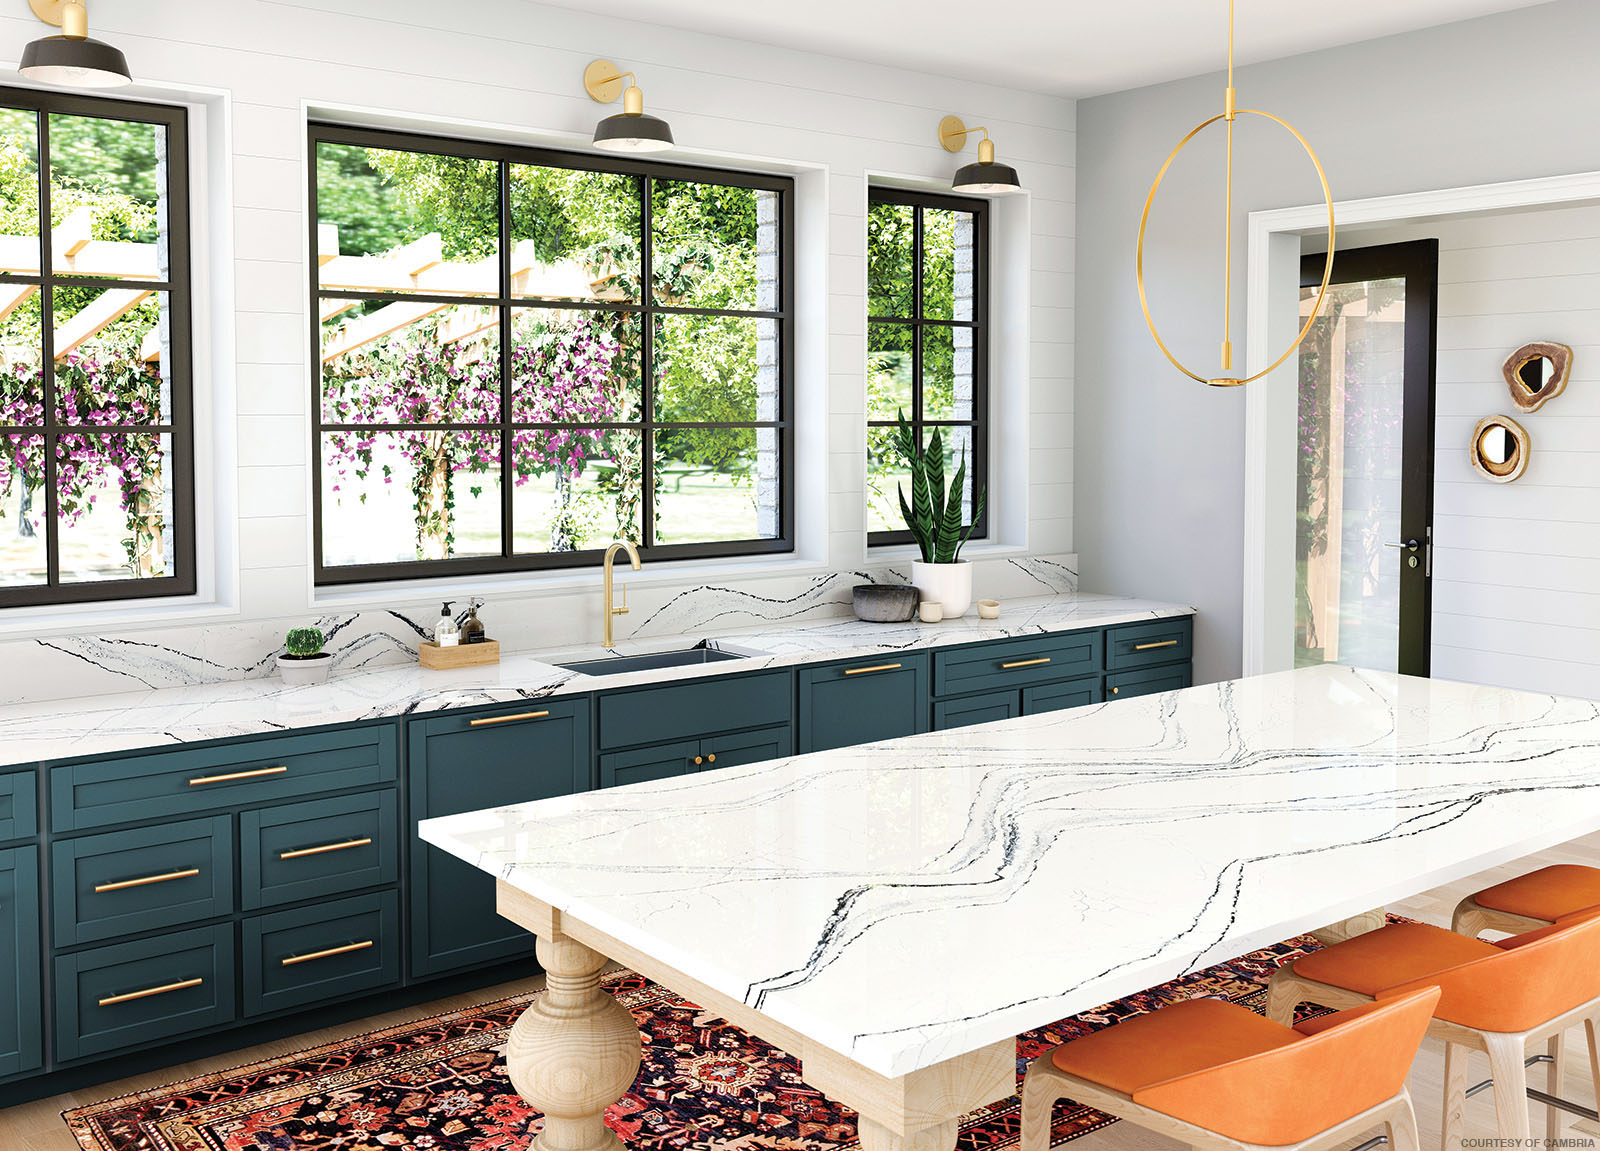 20 kitchen design trends you'll see this year